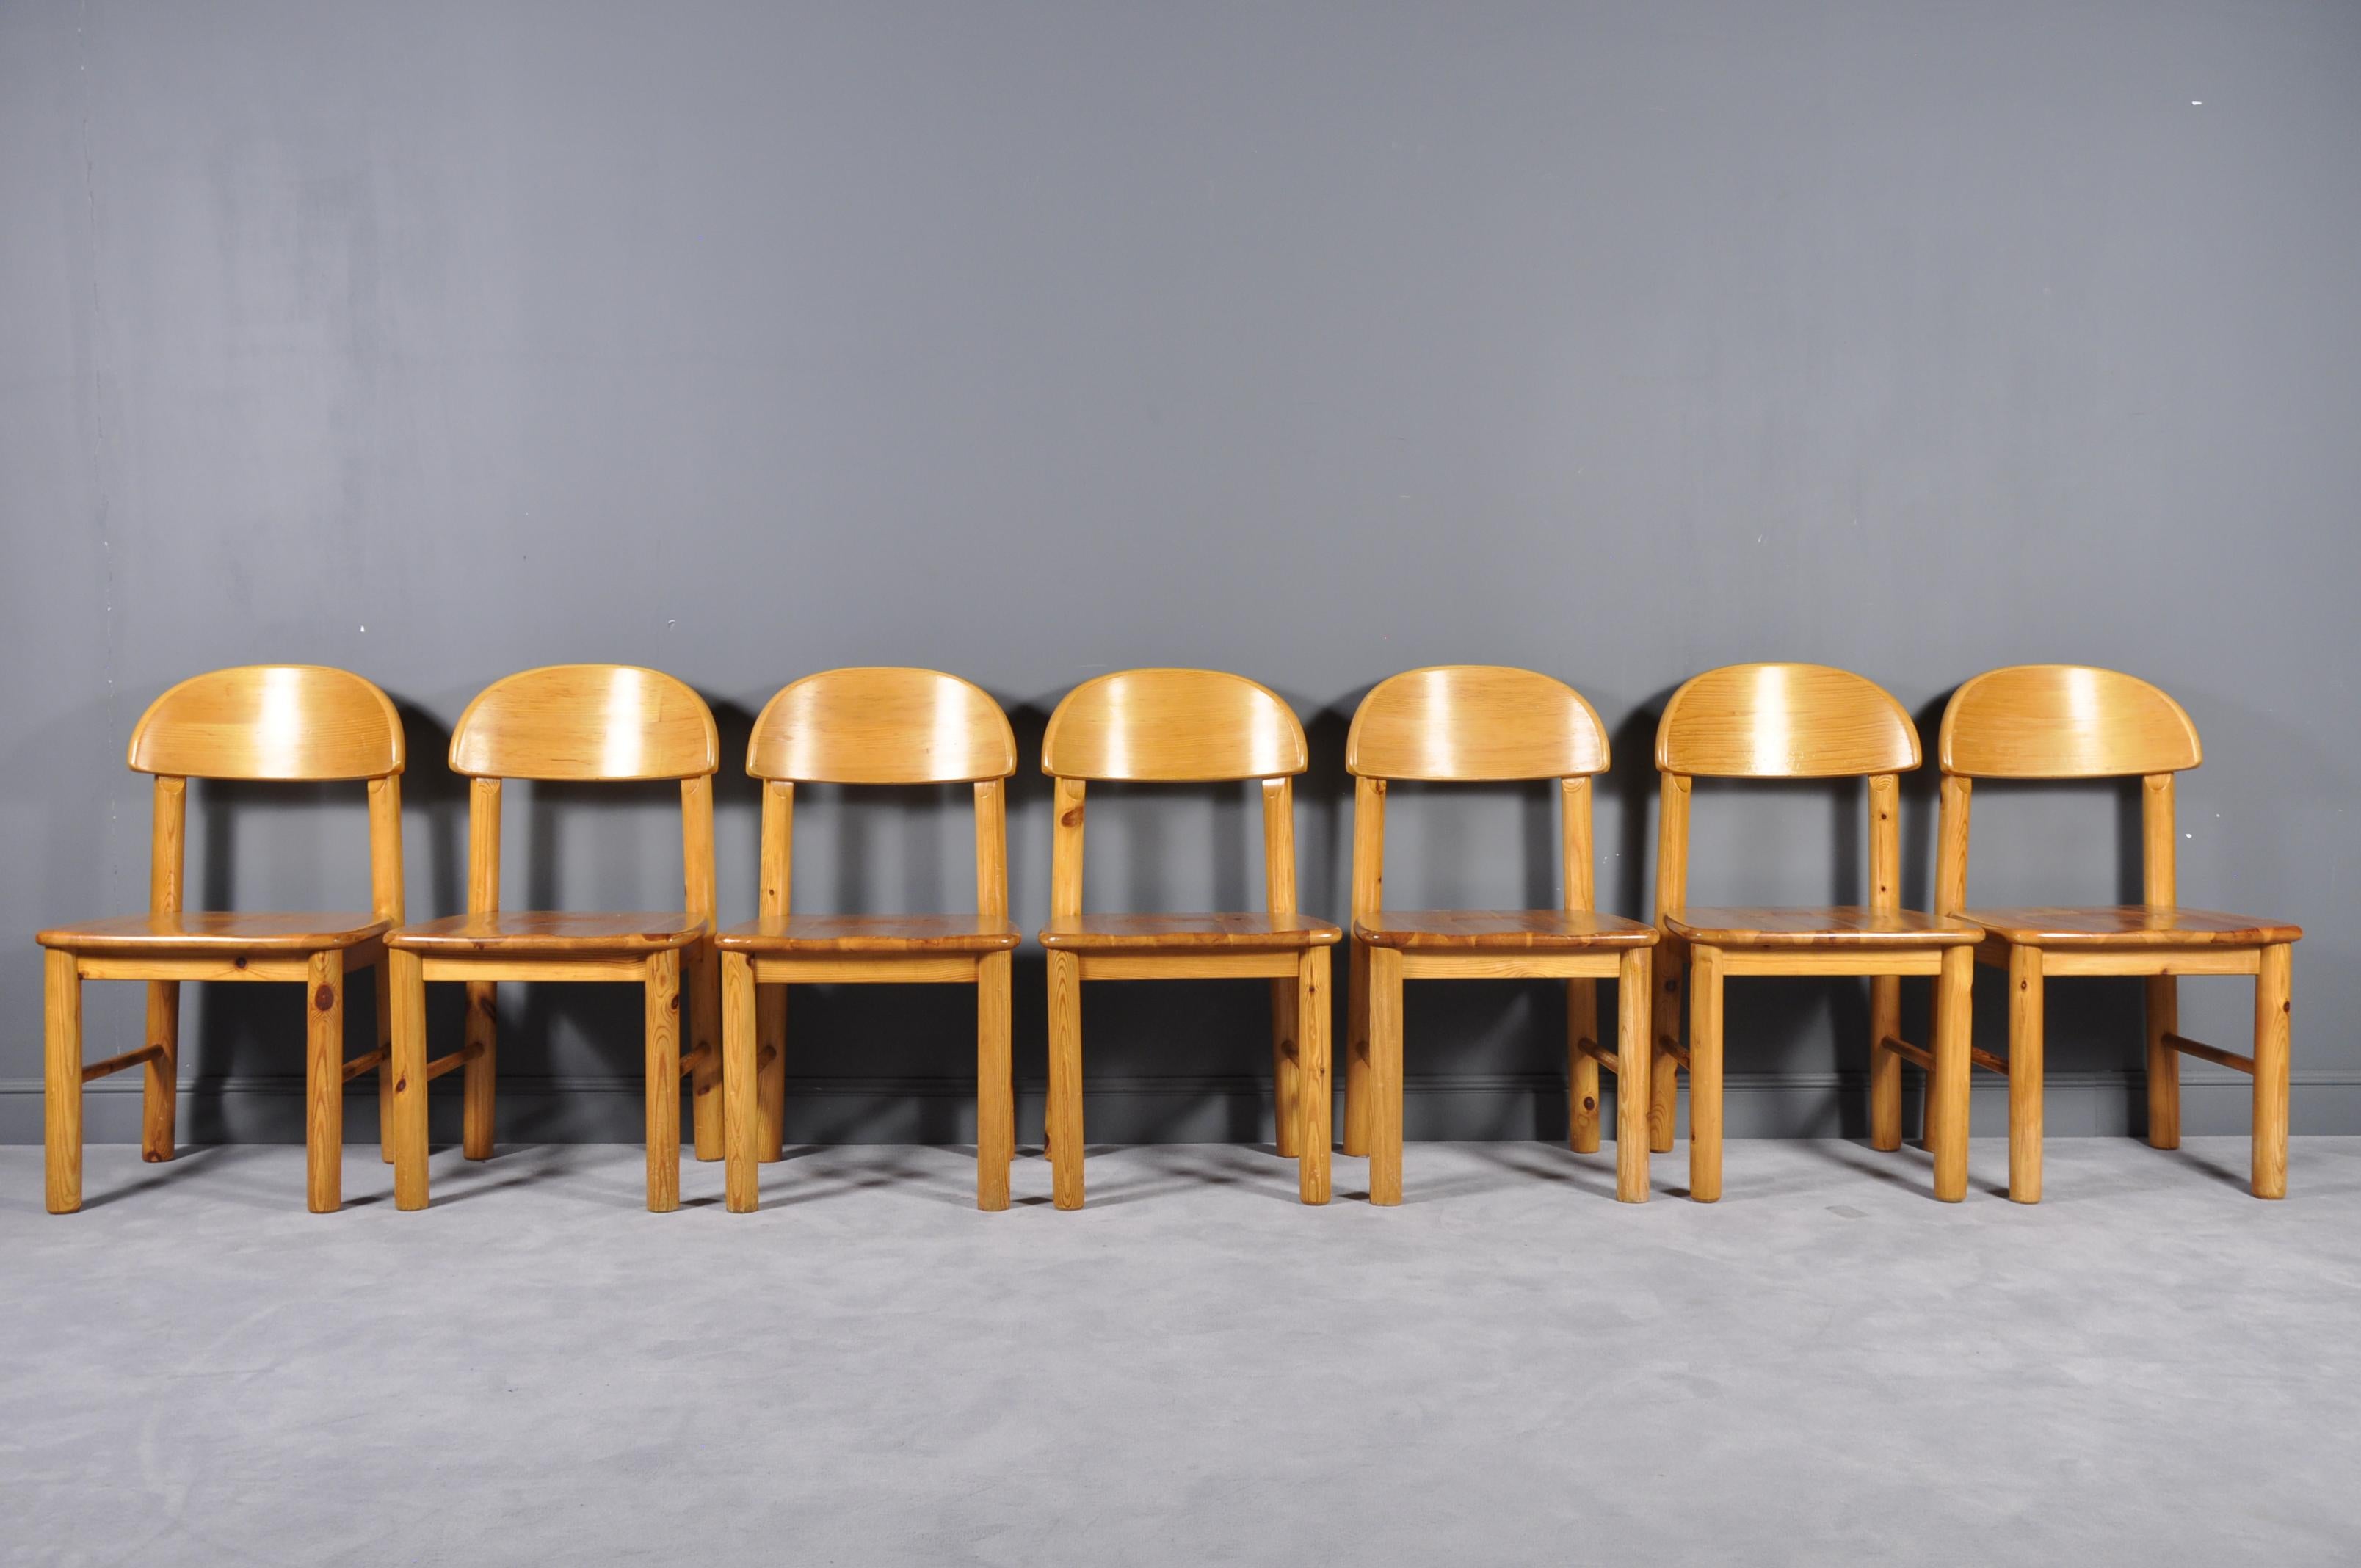 Measures: Table W 100/200, D 100, H 75 cm

Chairs W 50, D 50, H 85 cm, Seat H 45 cm

Stunning dining set designed by Rainer Daumiller, manufactured by Hirtshals Sawmill in Denmark, circa 1970. This impressive set contains one extendable dining